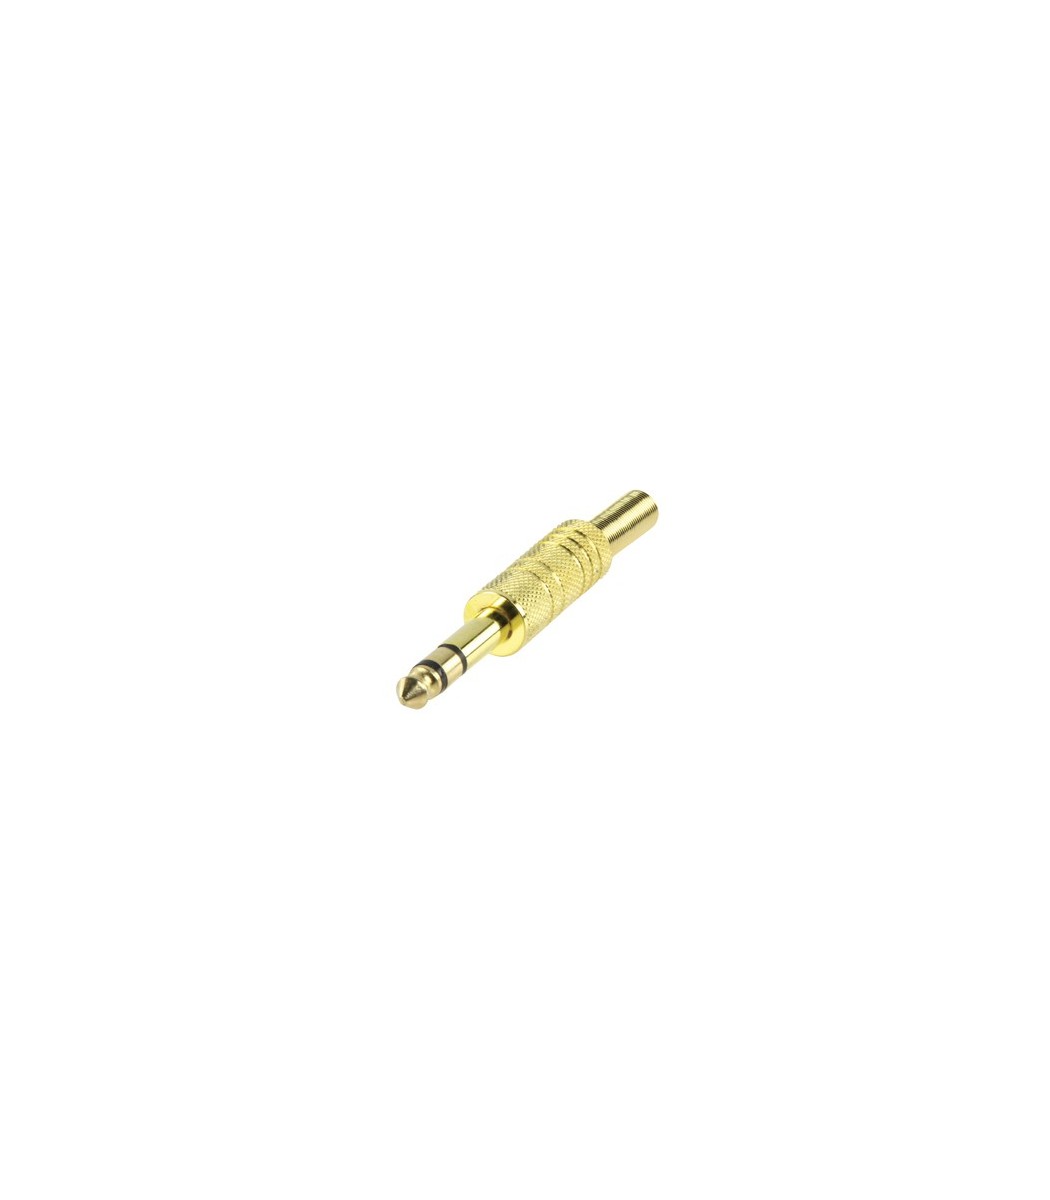 Jack plug, 6.3 mm stereo, gold-plated